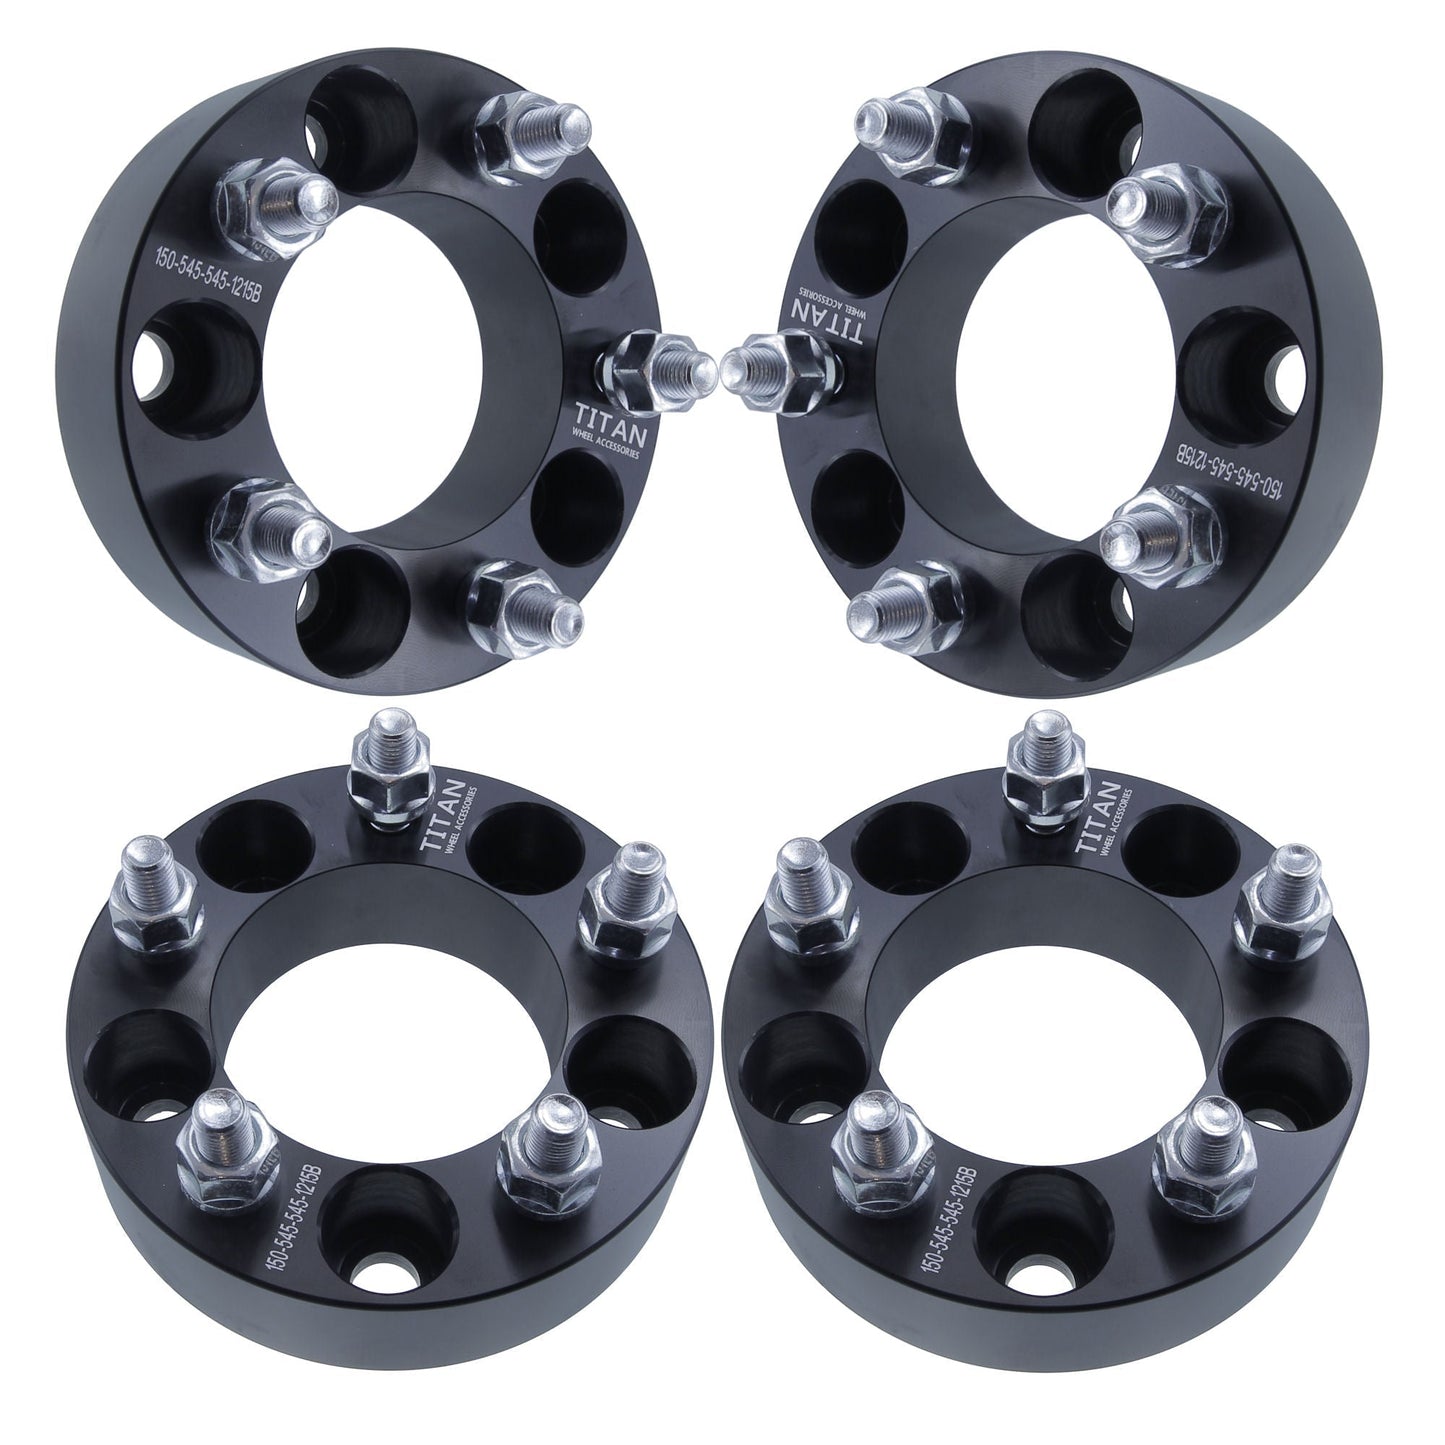 1.5" (38mm) Titan Wheel Spacers for Chevy Buick Cadillac | 5x114.3 (5x4.5) | 12x1.5 Studs | Set of 4 | Titan Wheel Accessories